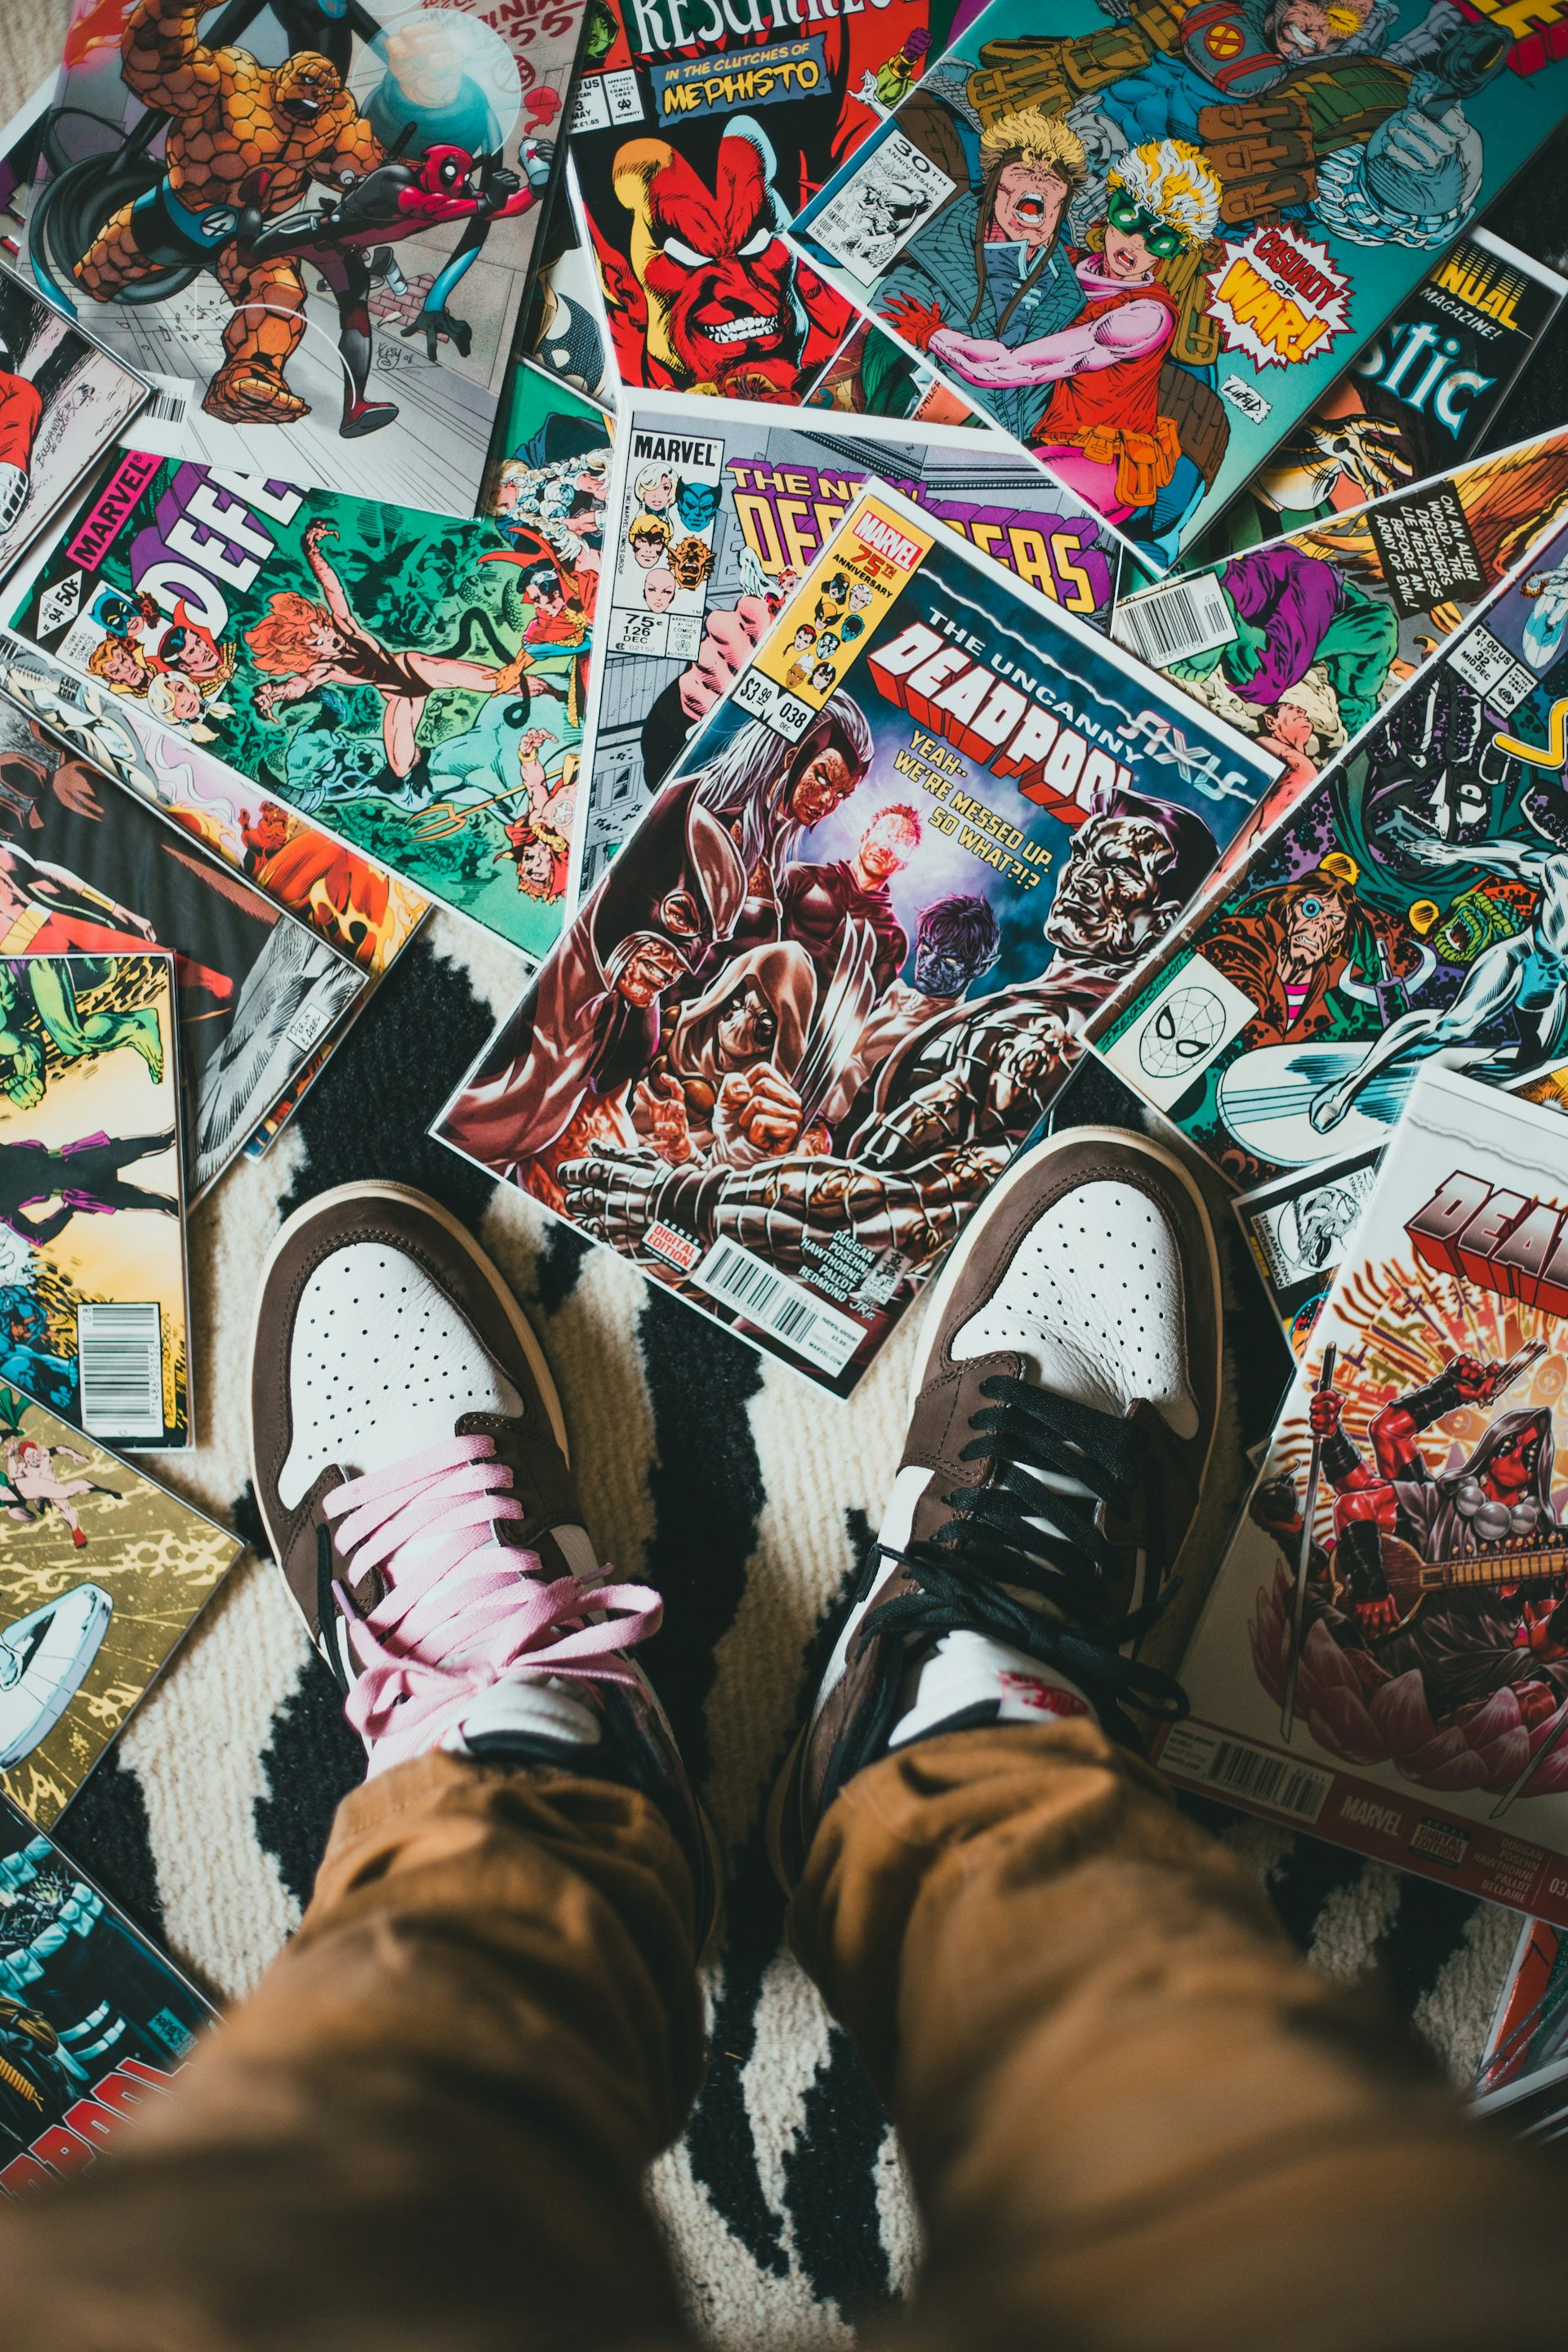 A pair of trainers/sneakers standing on an array of Marvel comics.